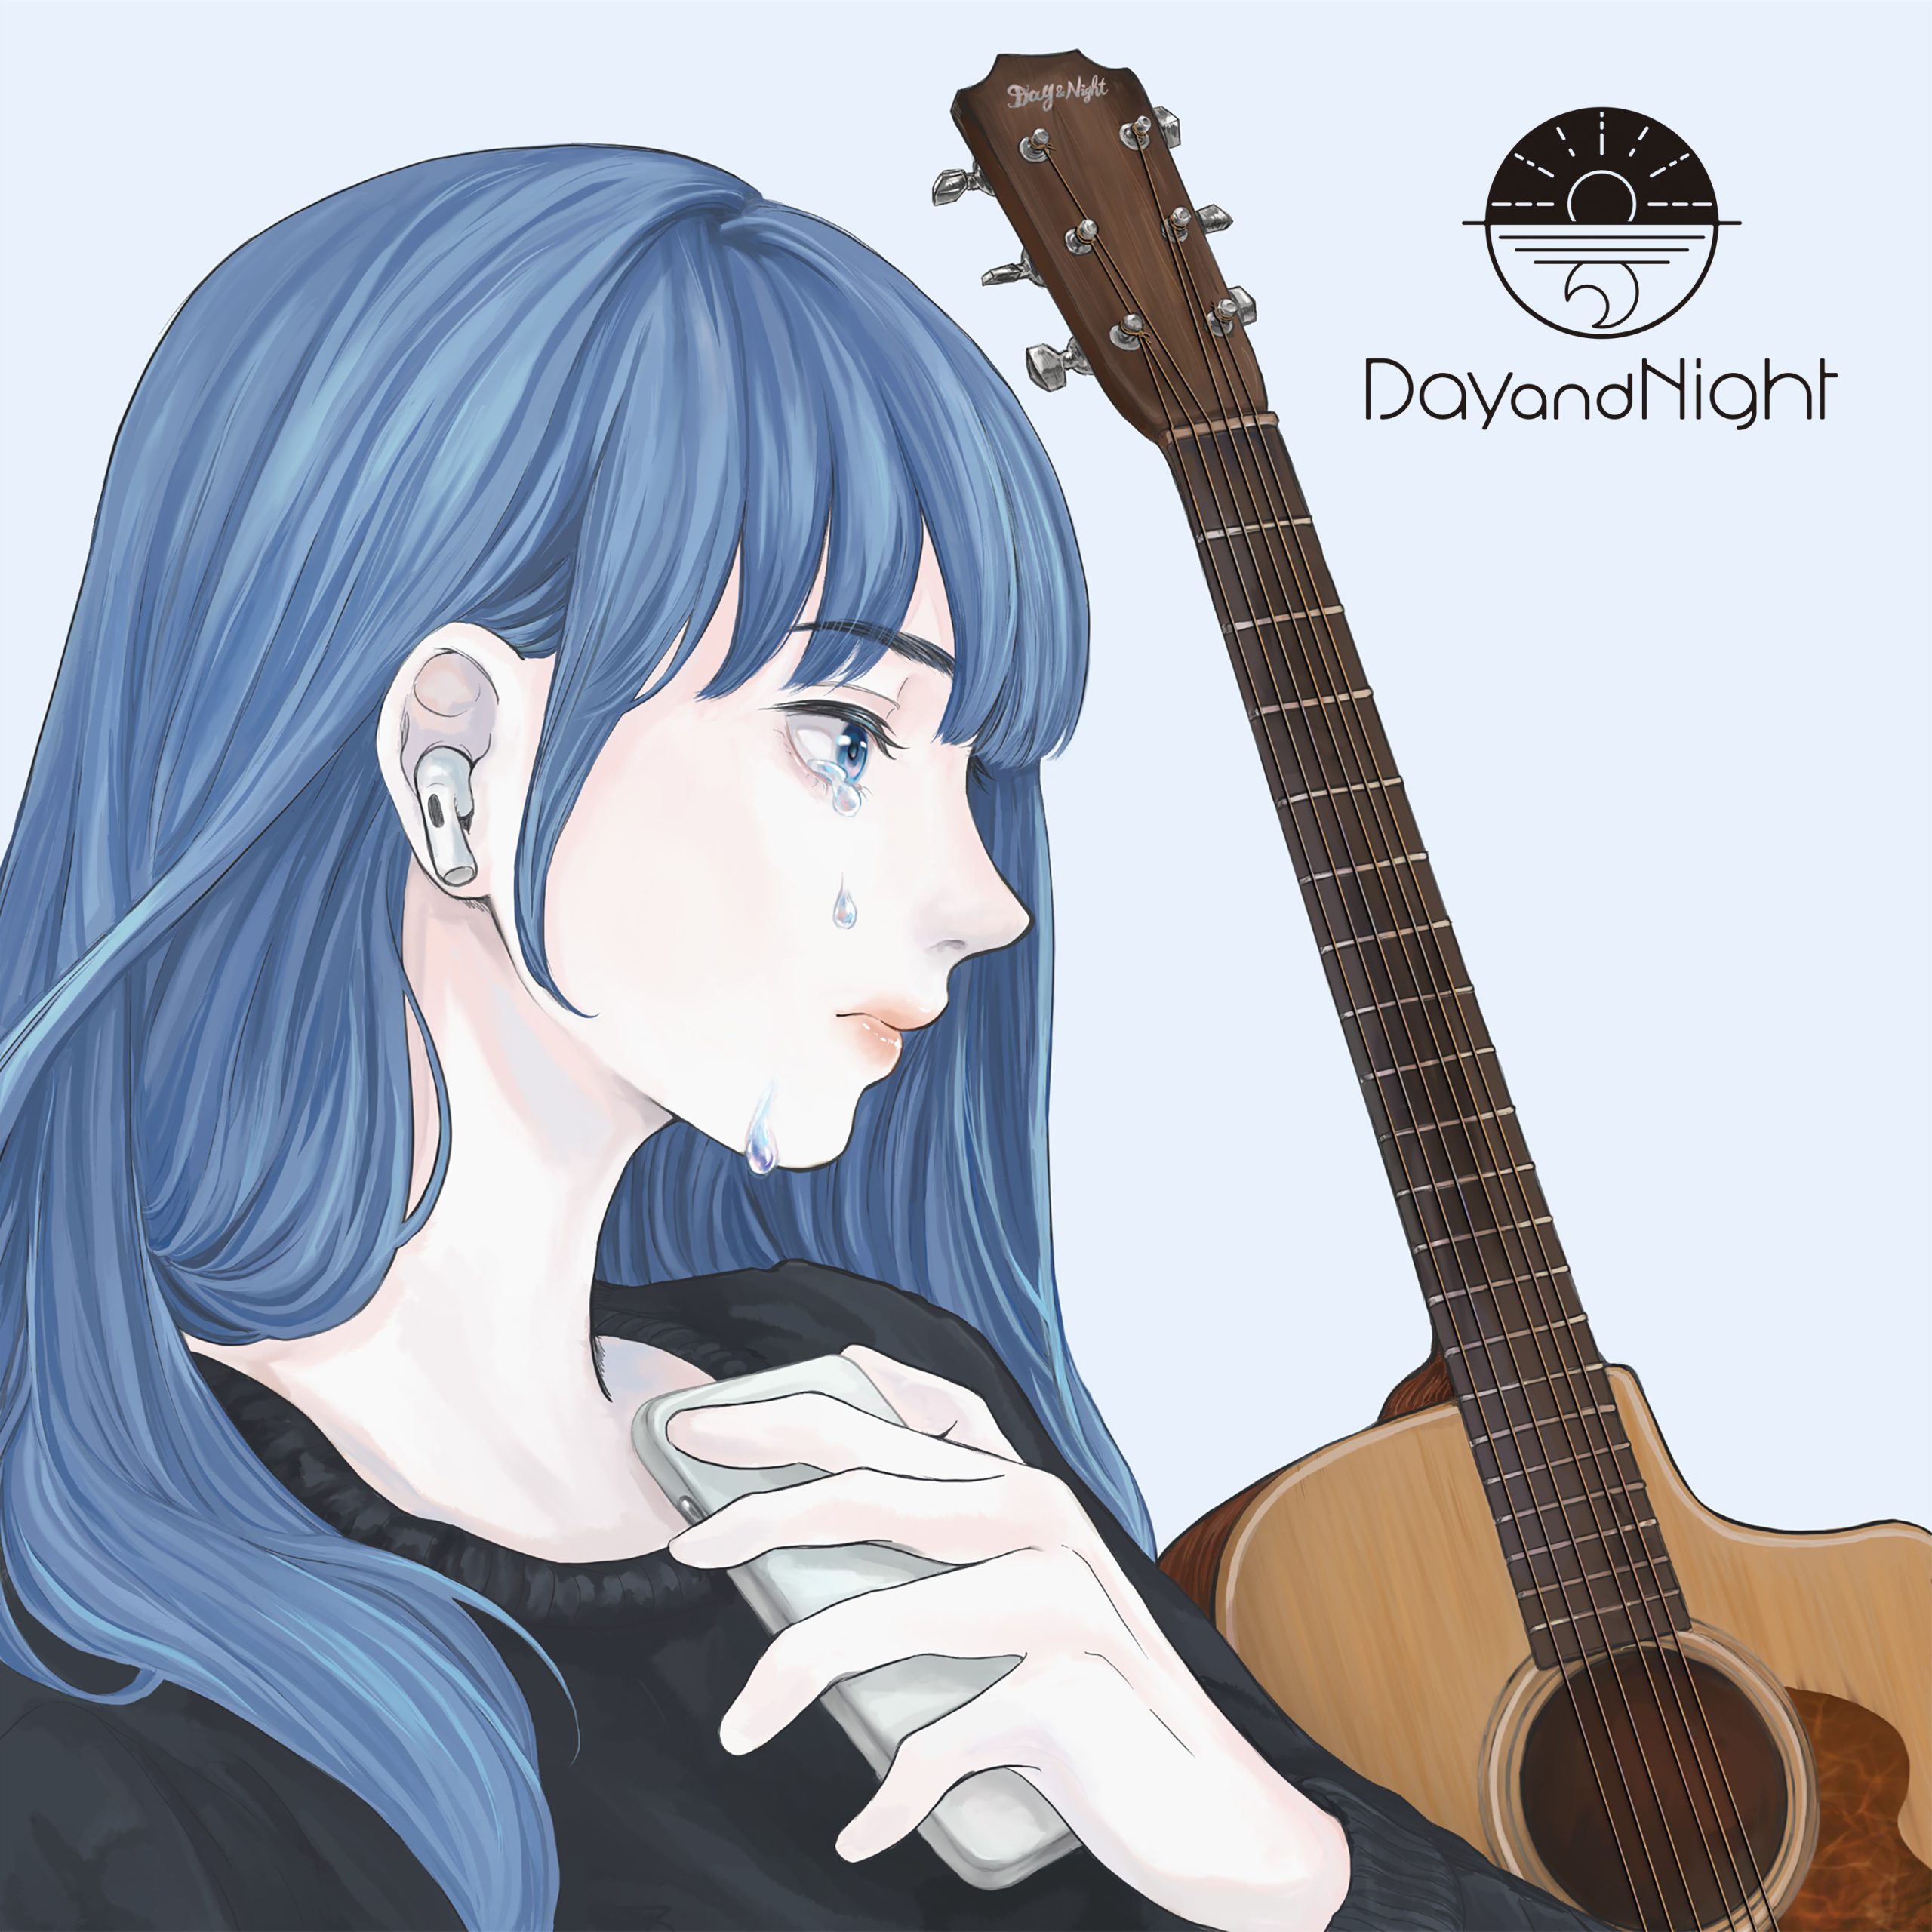 Day and Night Covers ～誰そ彼～ / Day and Night